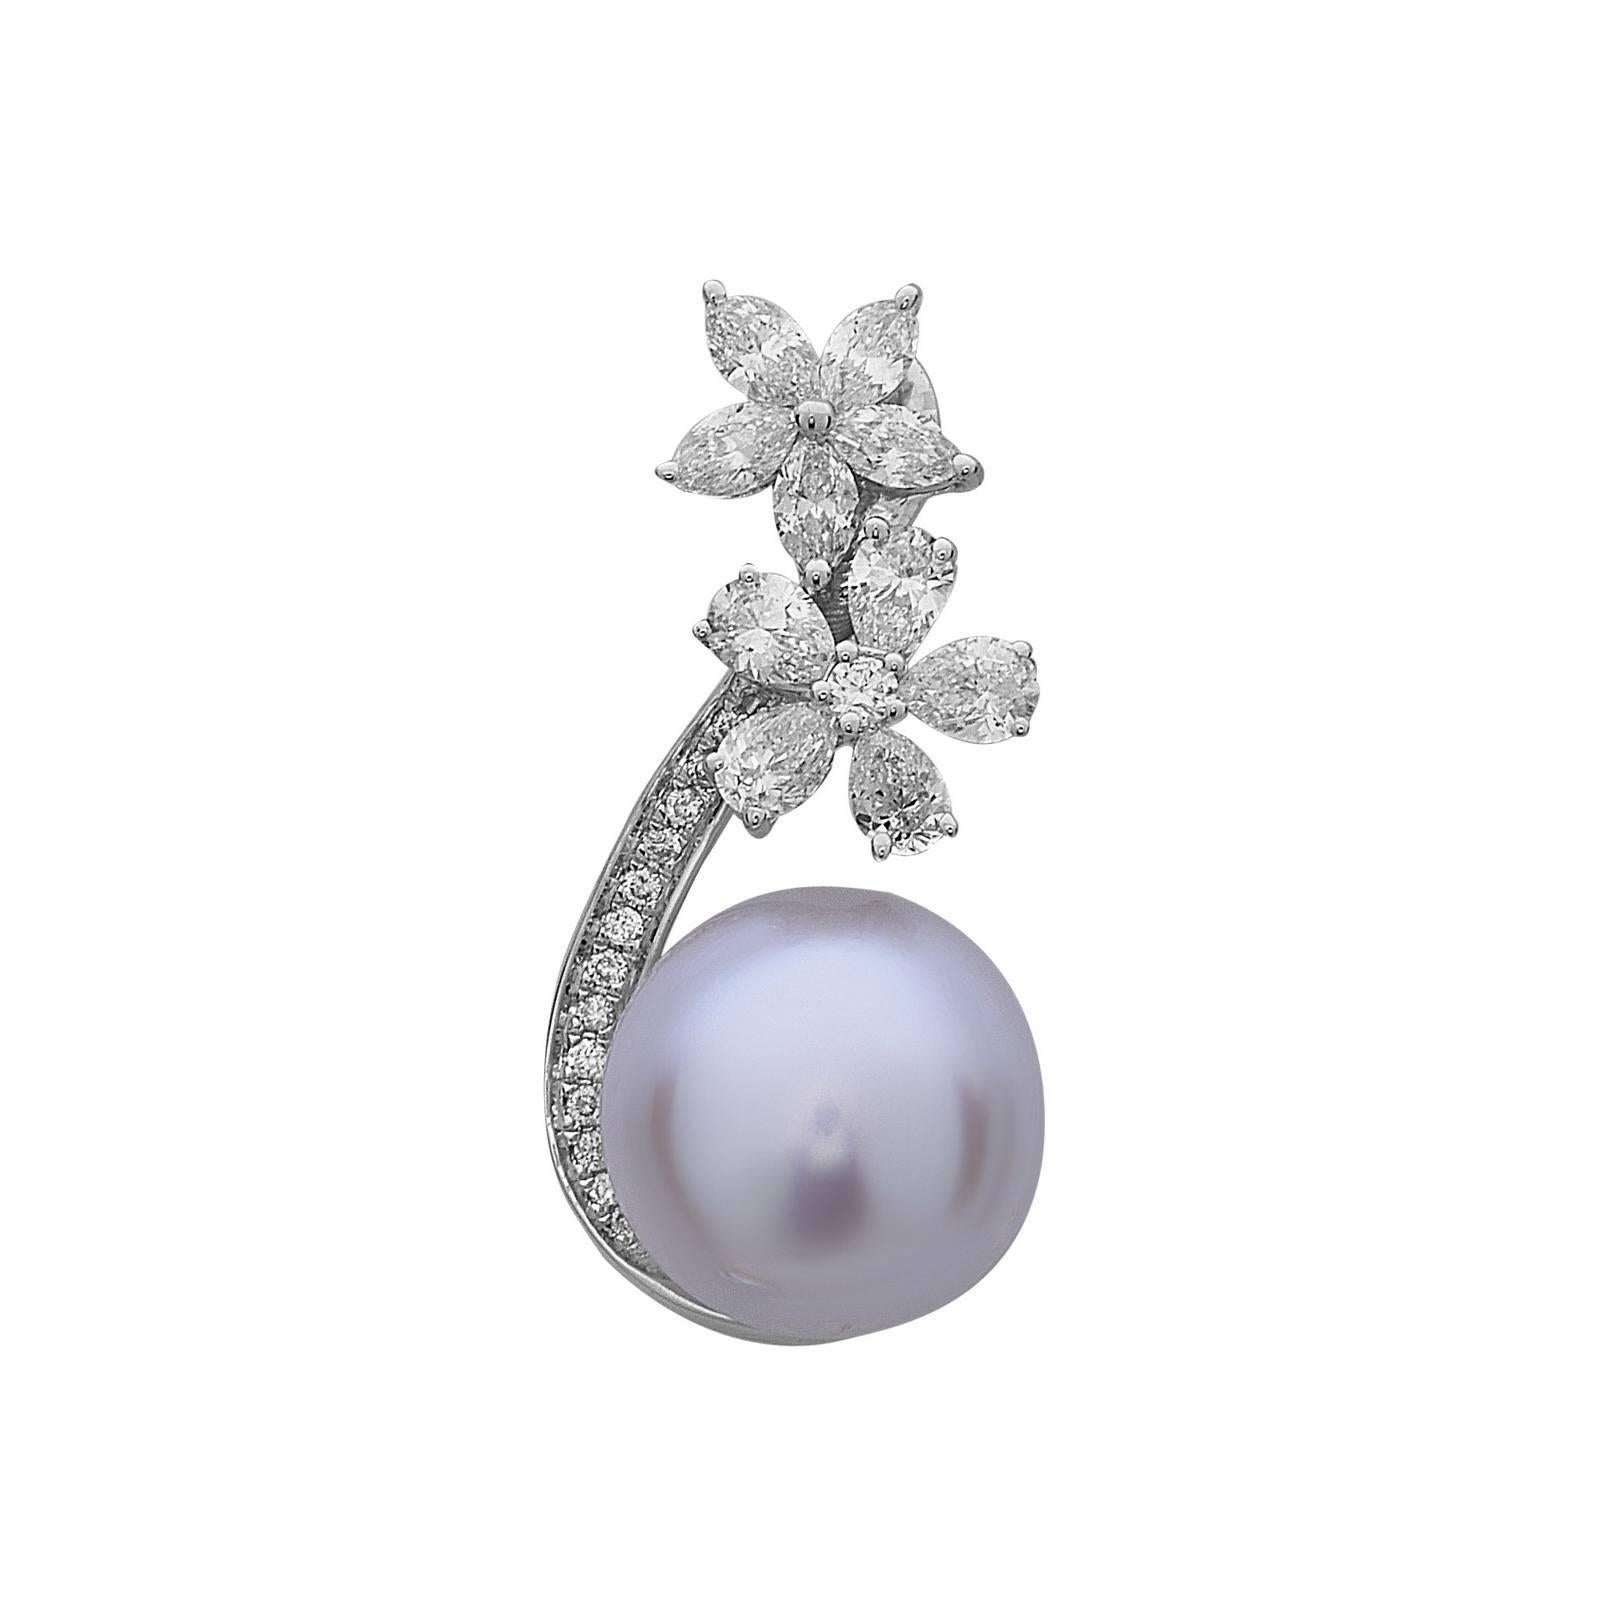 Stunning Floral 18K White Gold Pearl and Diamond Earring is super rich looking. It has 2 flowers one made on pear shape diamonds and another of marquees with a swirl of pave diamonds.

Earring Closure: Push Post
18k :8.42gms
Diamond: 2.48cts